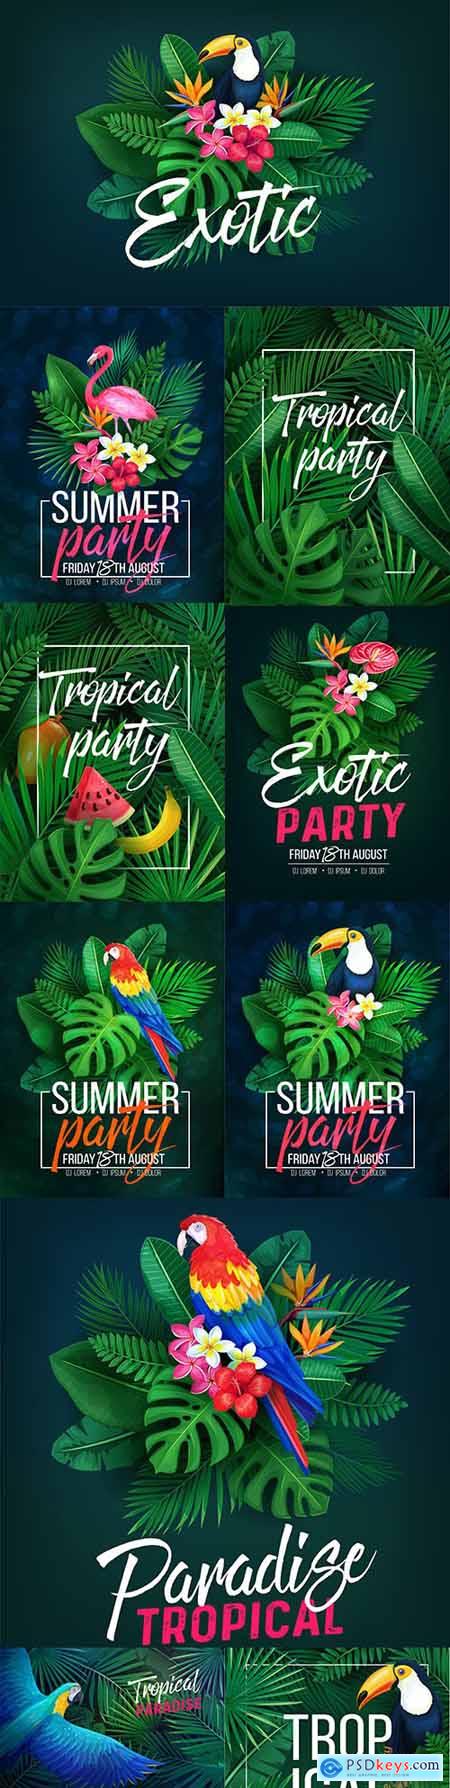 Summer tropical party bright design illustration